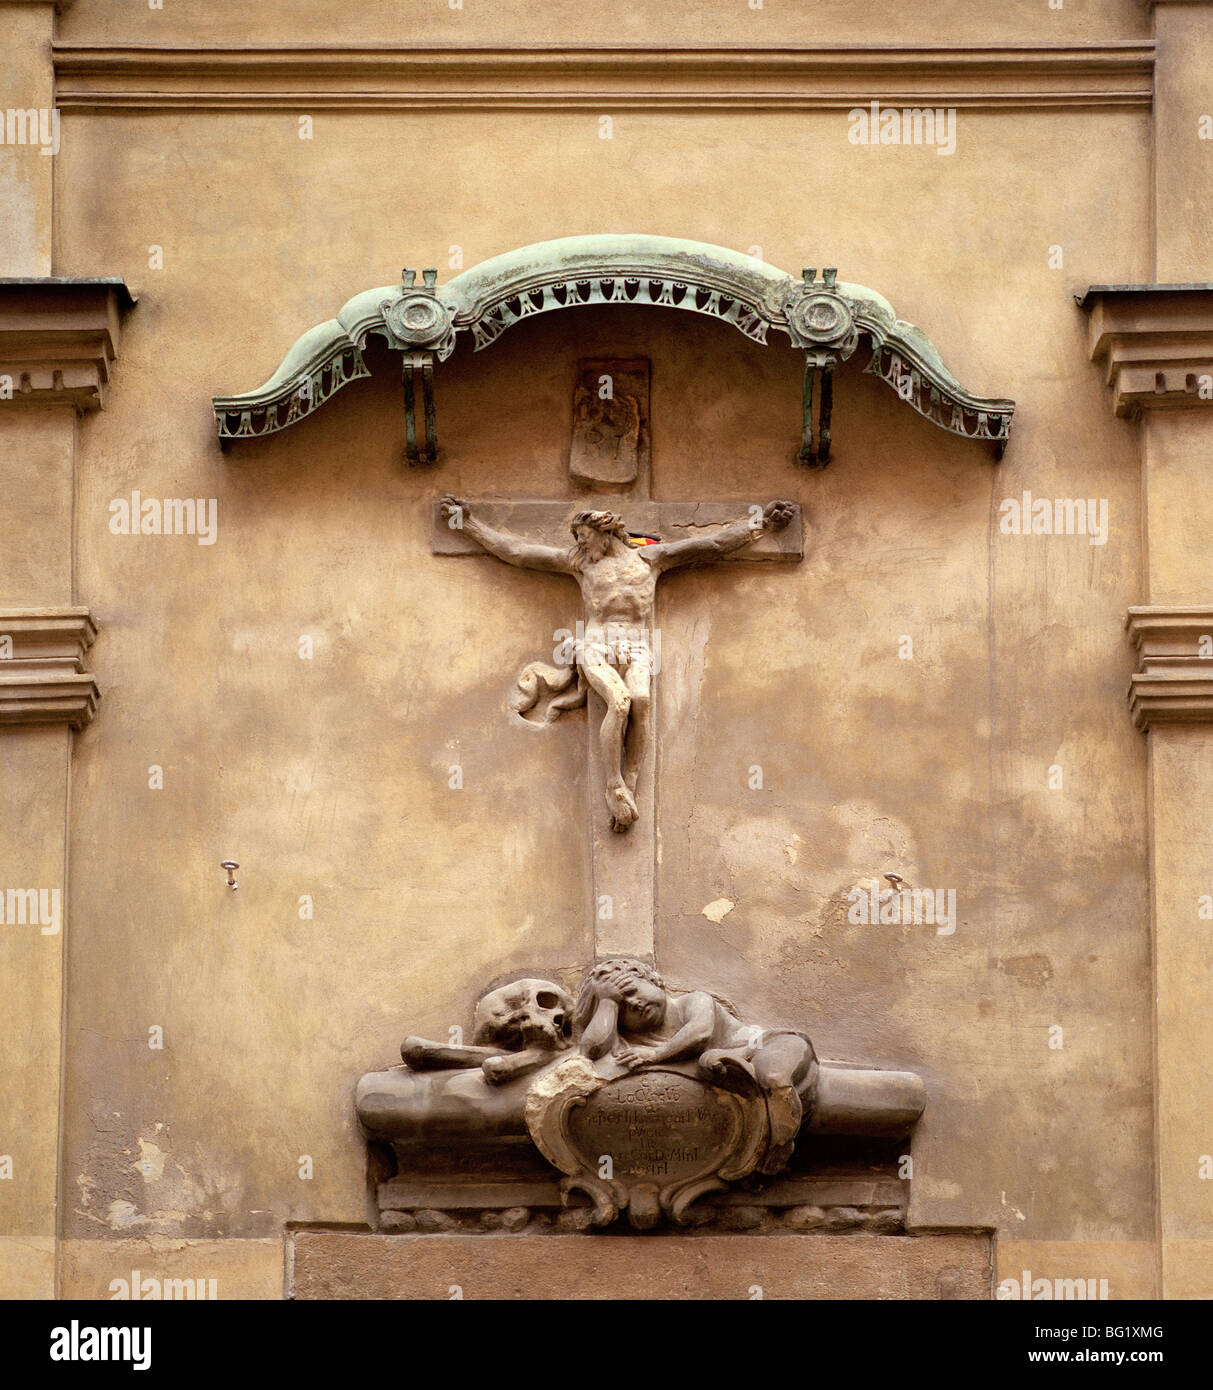 World Travel. Christian cross in the ancient city of Prague in the Czech Republic in Eastern Europe. Culture History Traveller Wanderlust Stock Photo